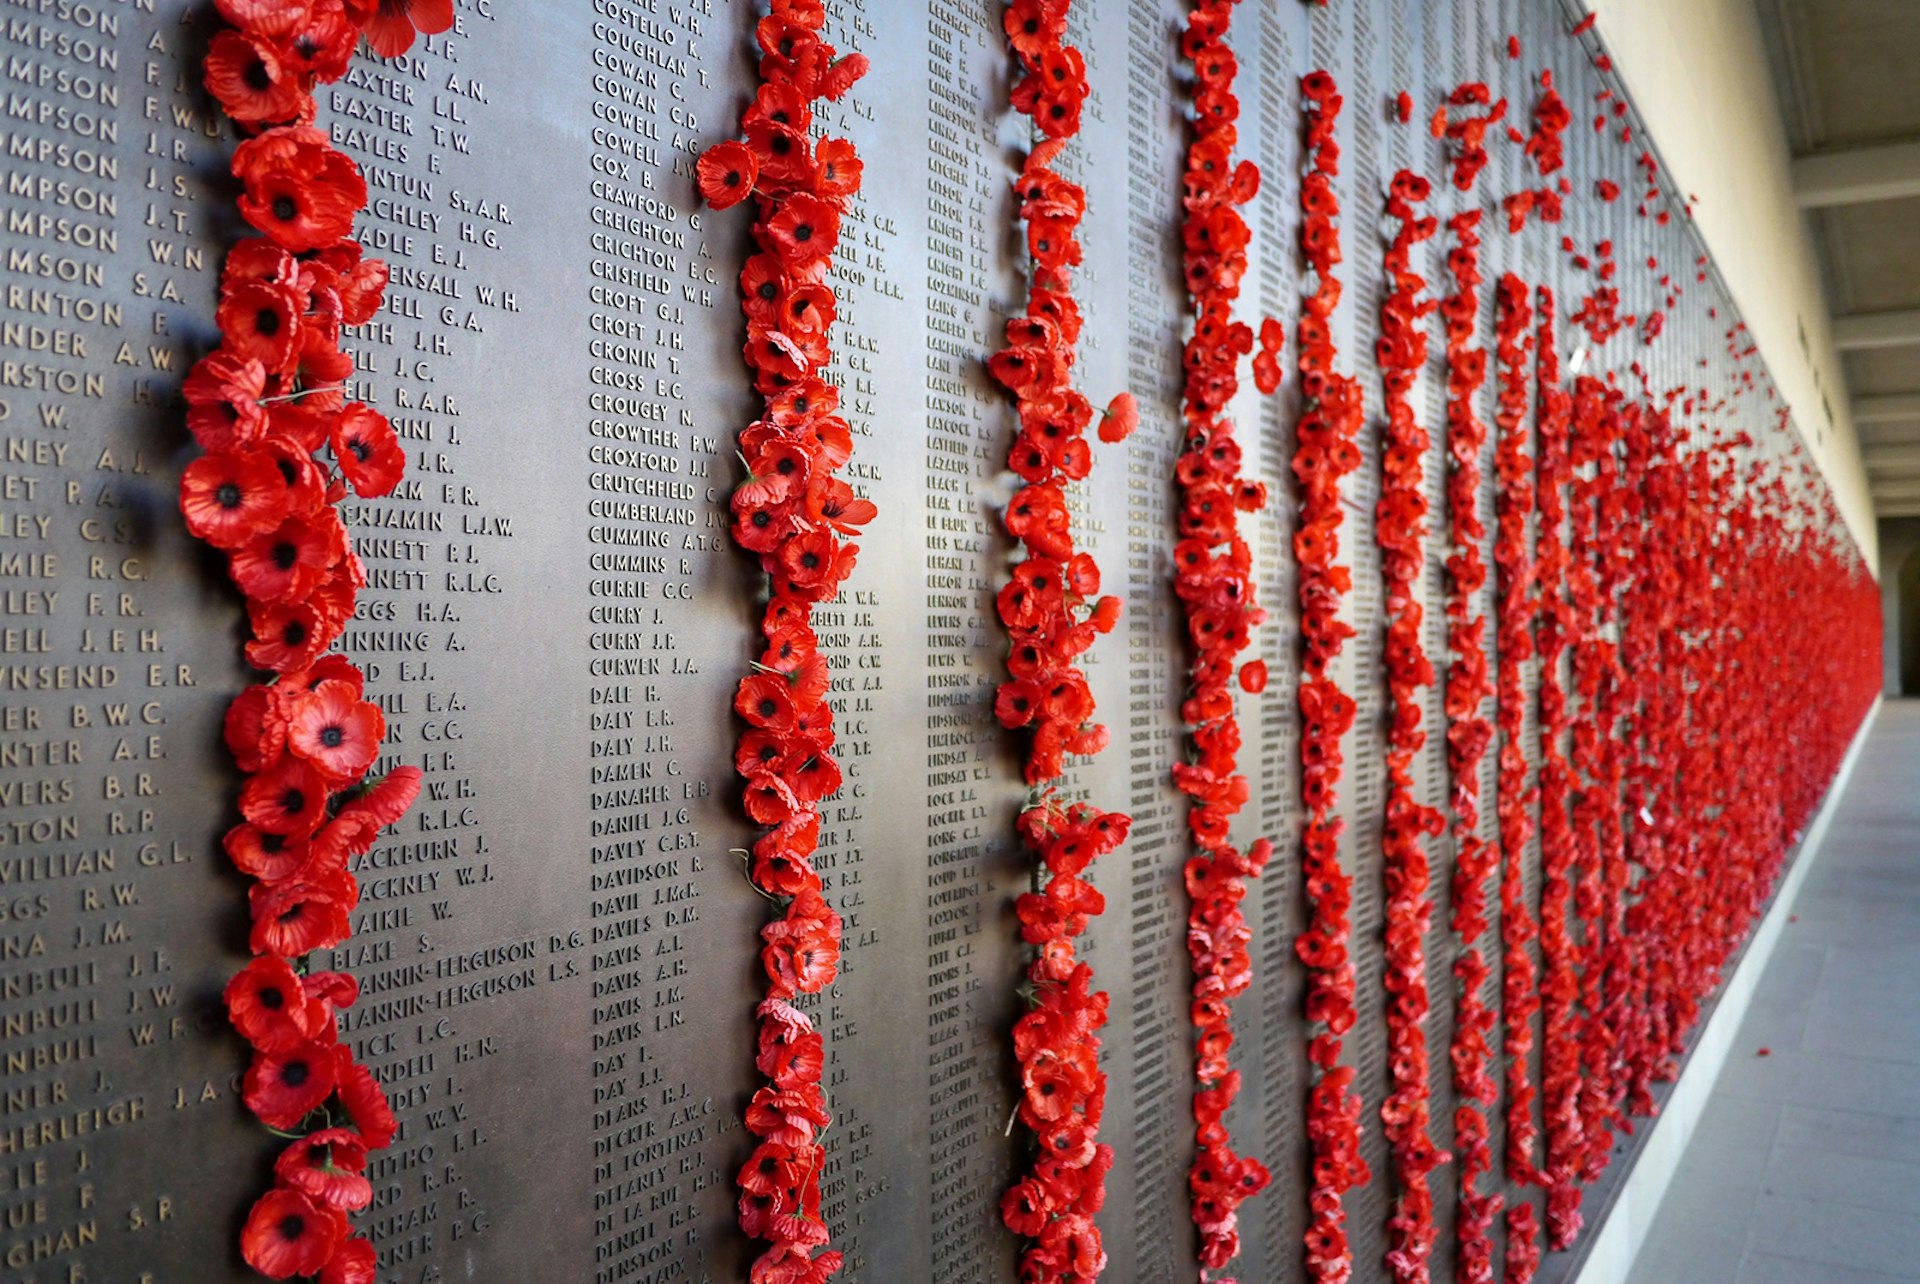 Features - Poppies at the war memorial in Canberra, Australia